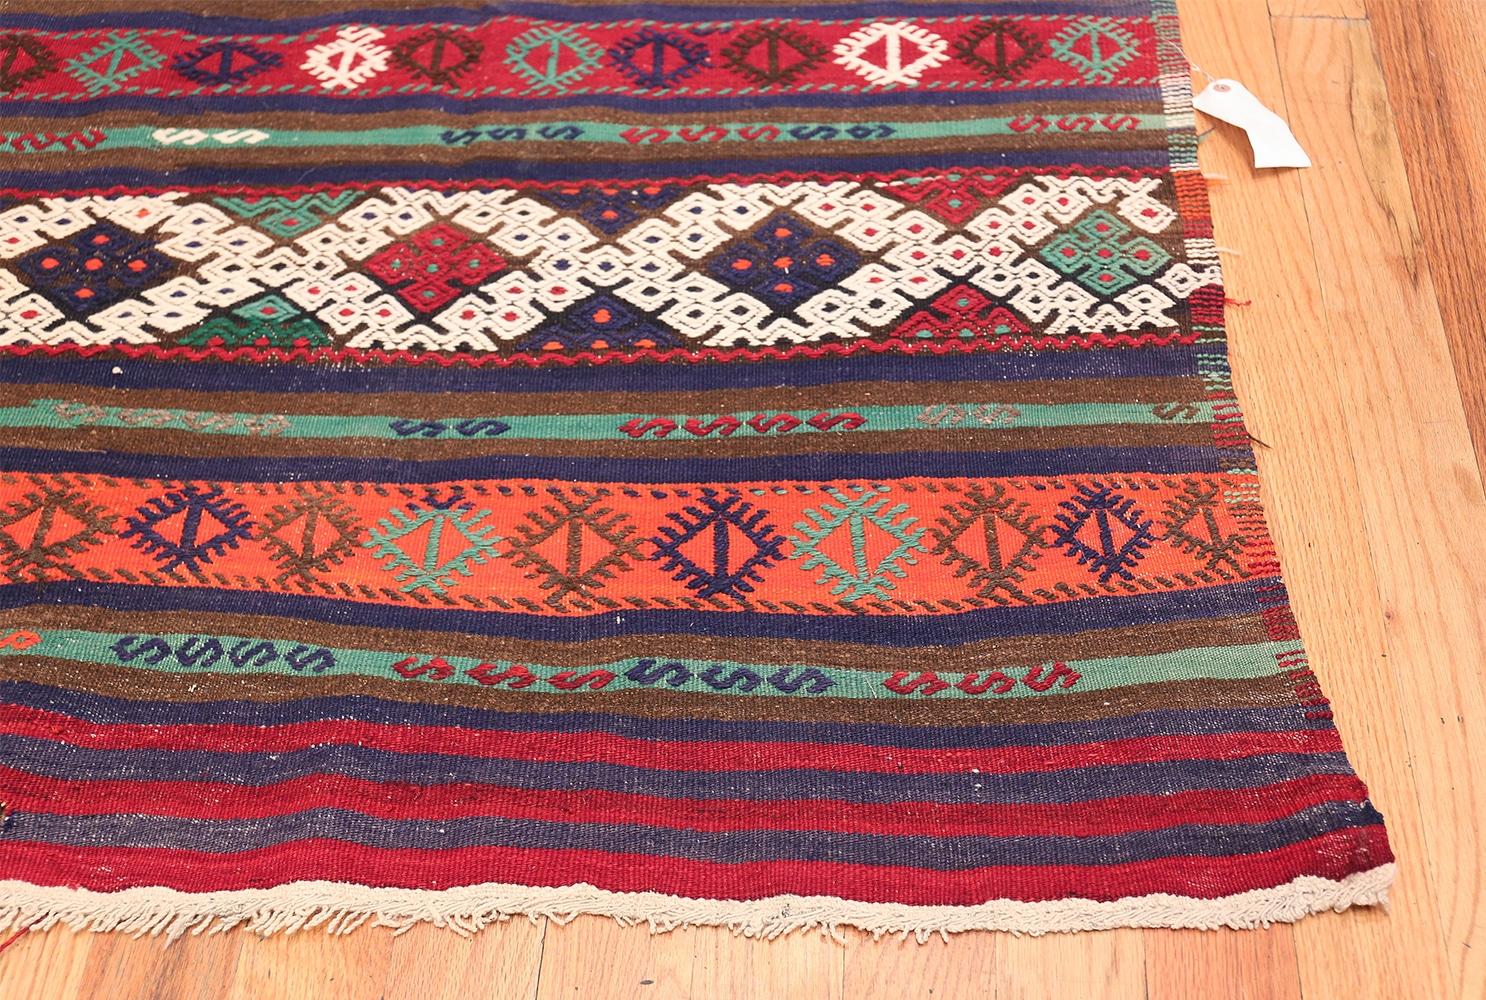 20th Century Vintage Tribal Turkish Kilim. Size: 5 ft 3 in x 9 ft 2 in